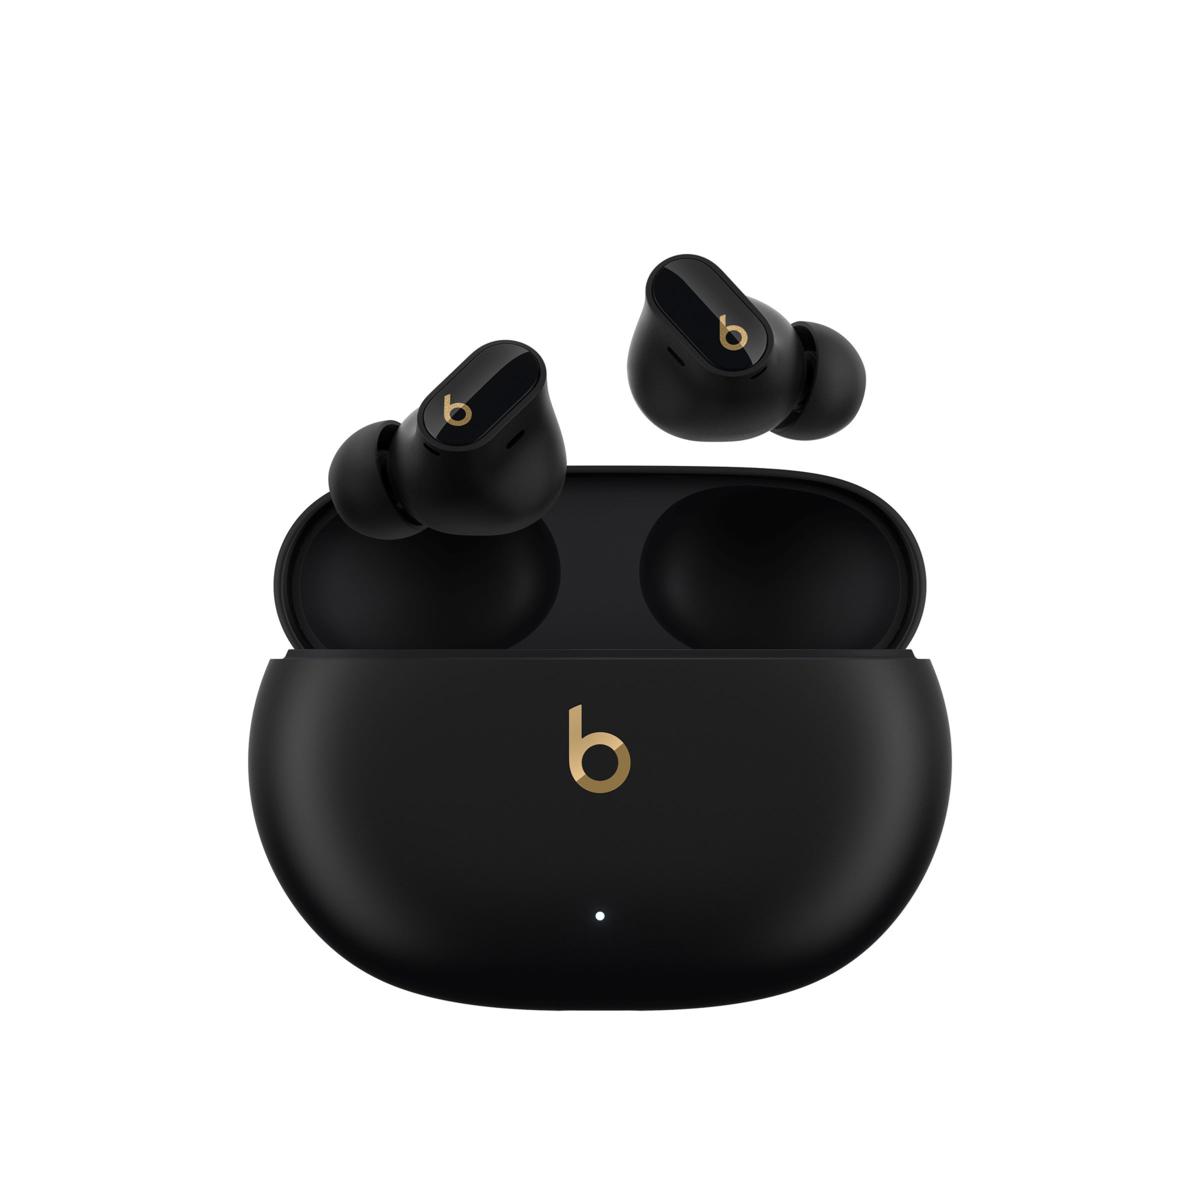 disabling-touch-controls-on-beats-flex-wireless-earbuds